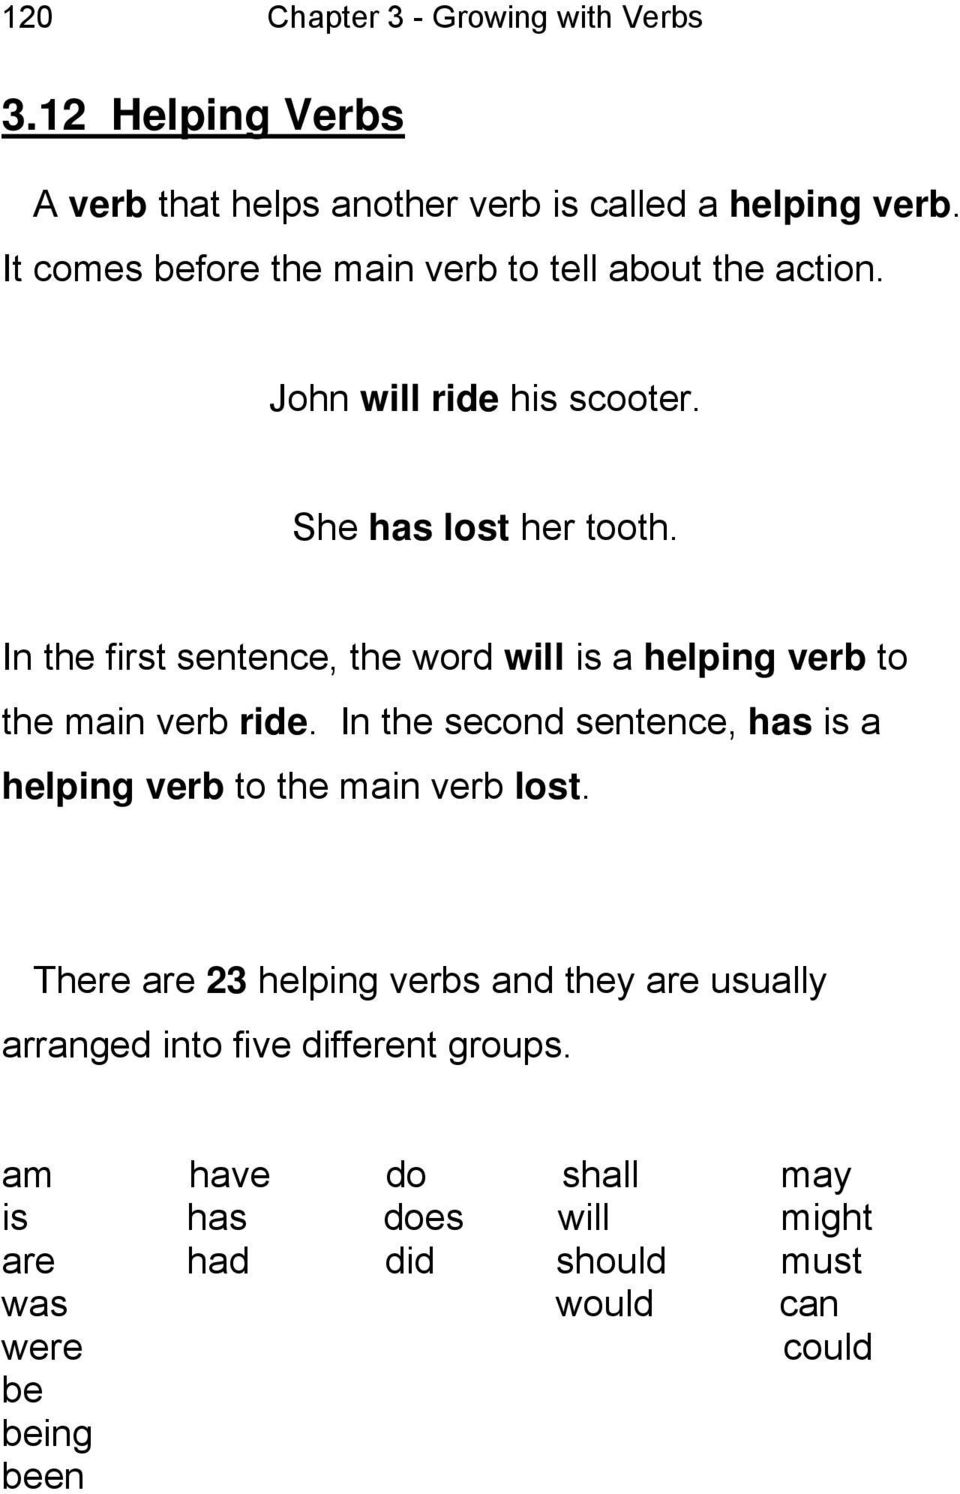 In the first sentence, the word will is a helping verb to the main verb ride.